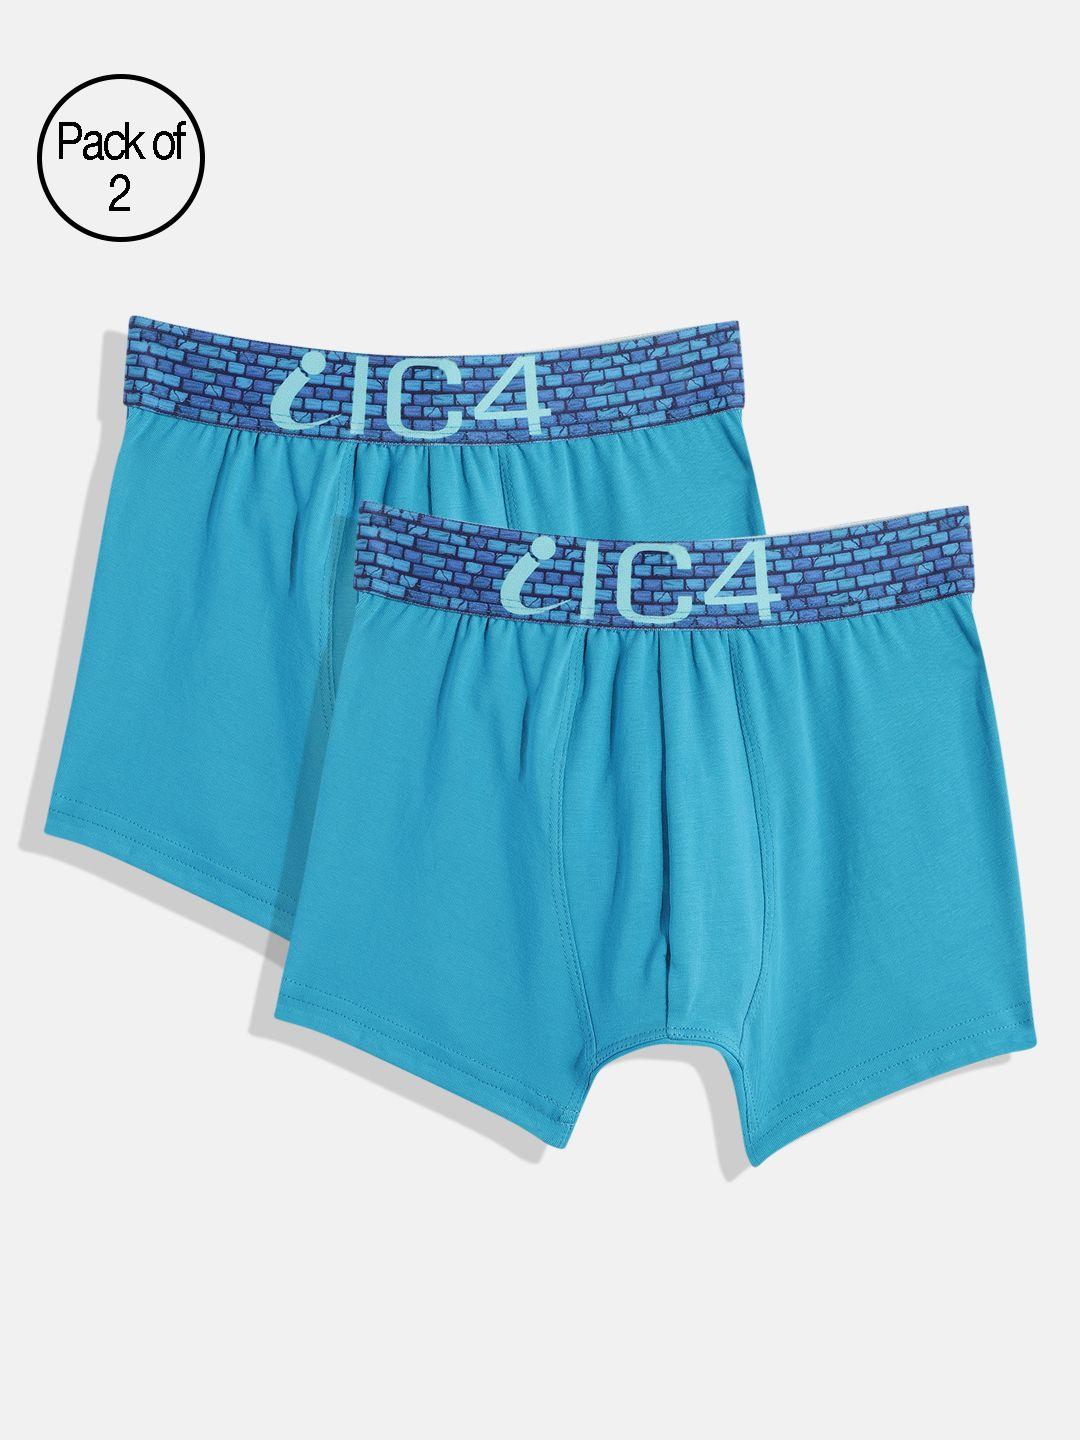 ic4 boys pack of 2 blue trunks 0t2004p2